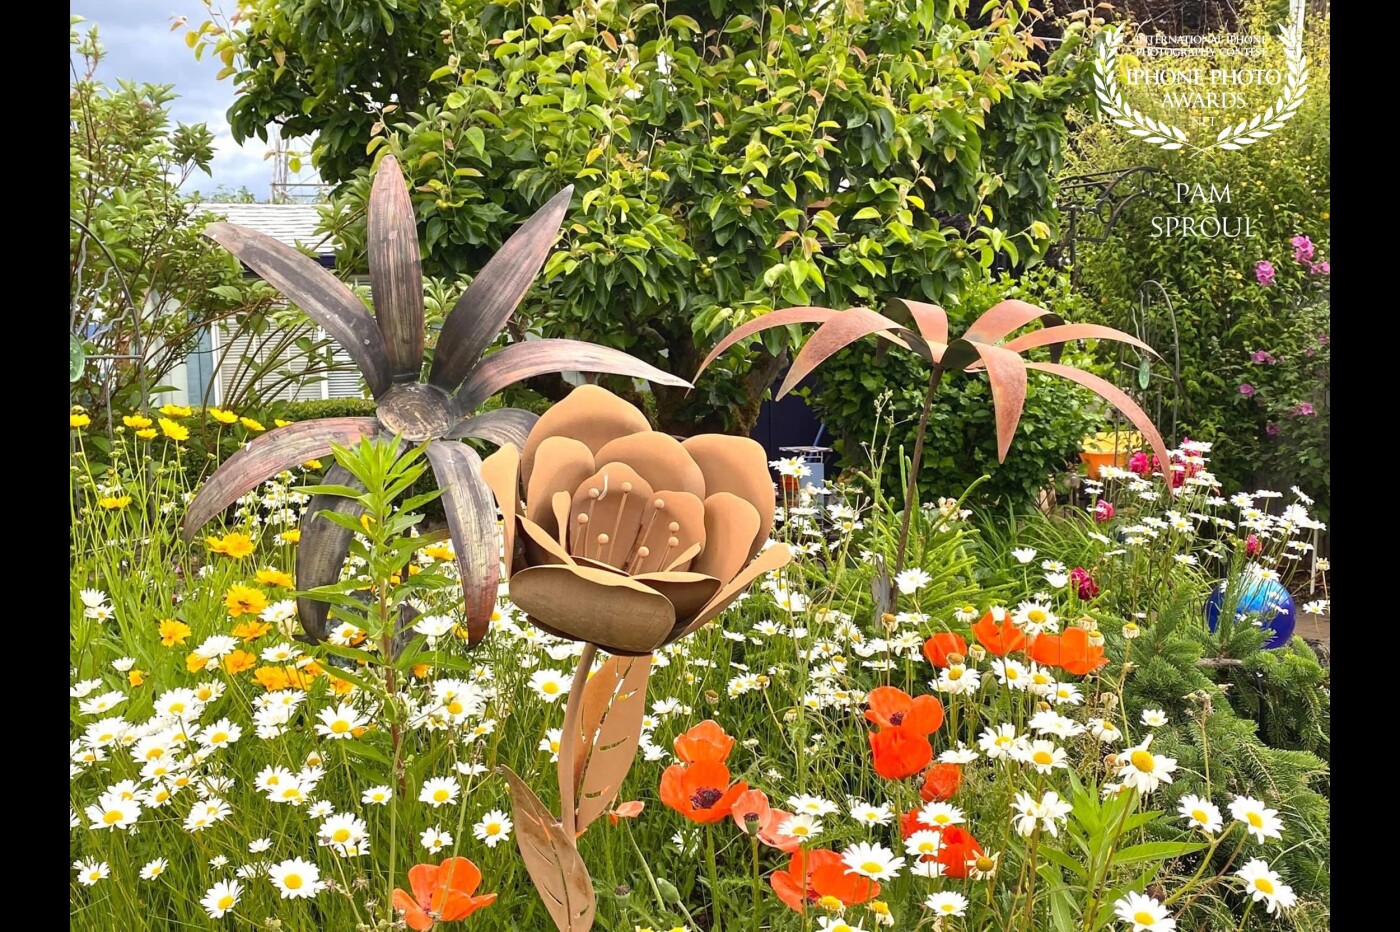 The colors and shapes in this beautiful garden were just waiting for an iPhone capture.<br />
I loved the contrast of the metal art against the wildflowers.<br />
<br />
Garden Art -“2021”